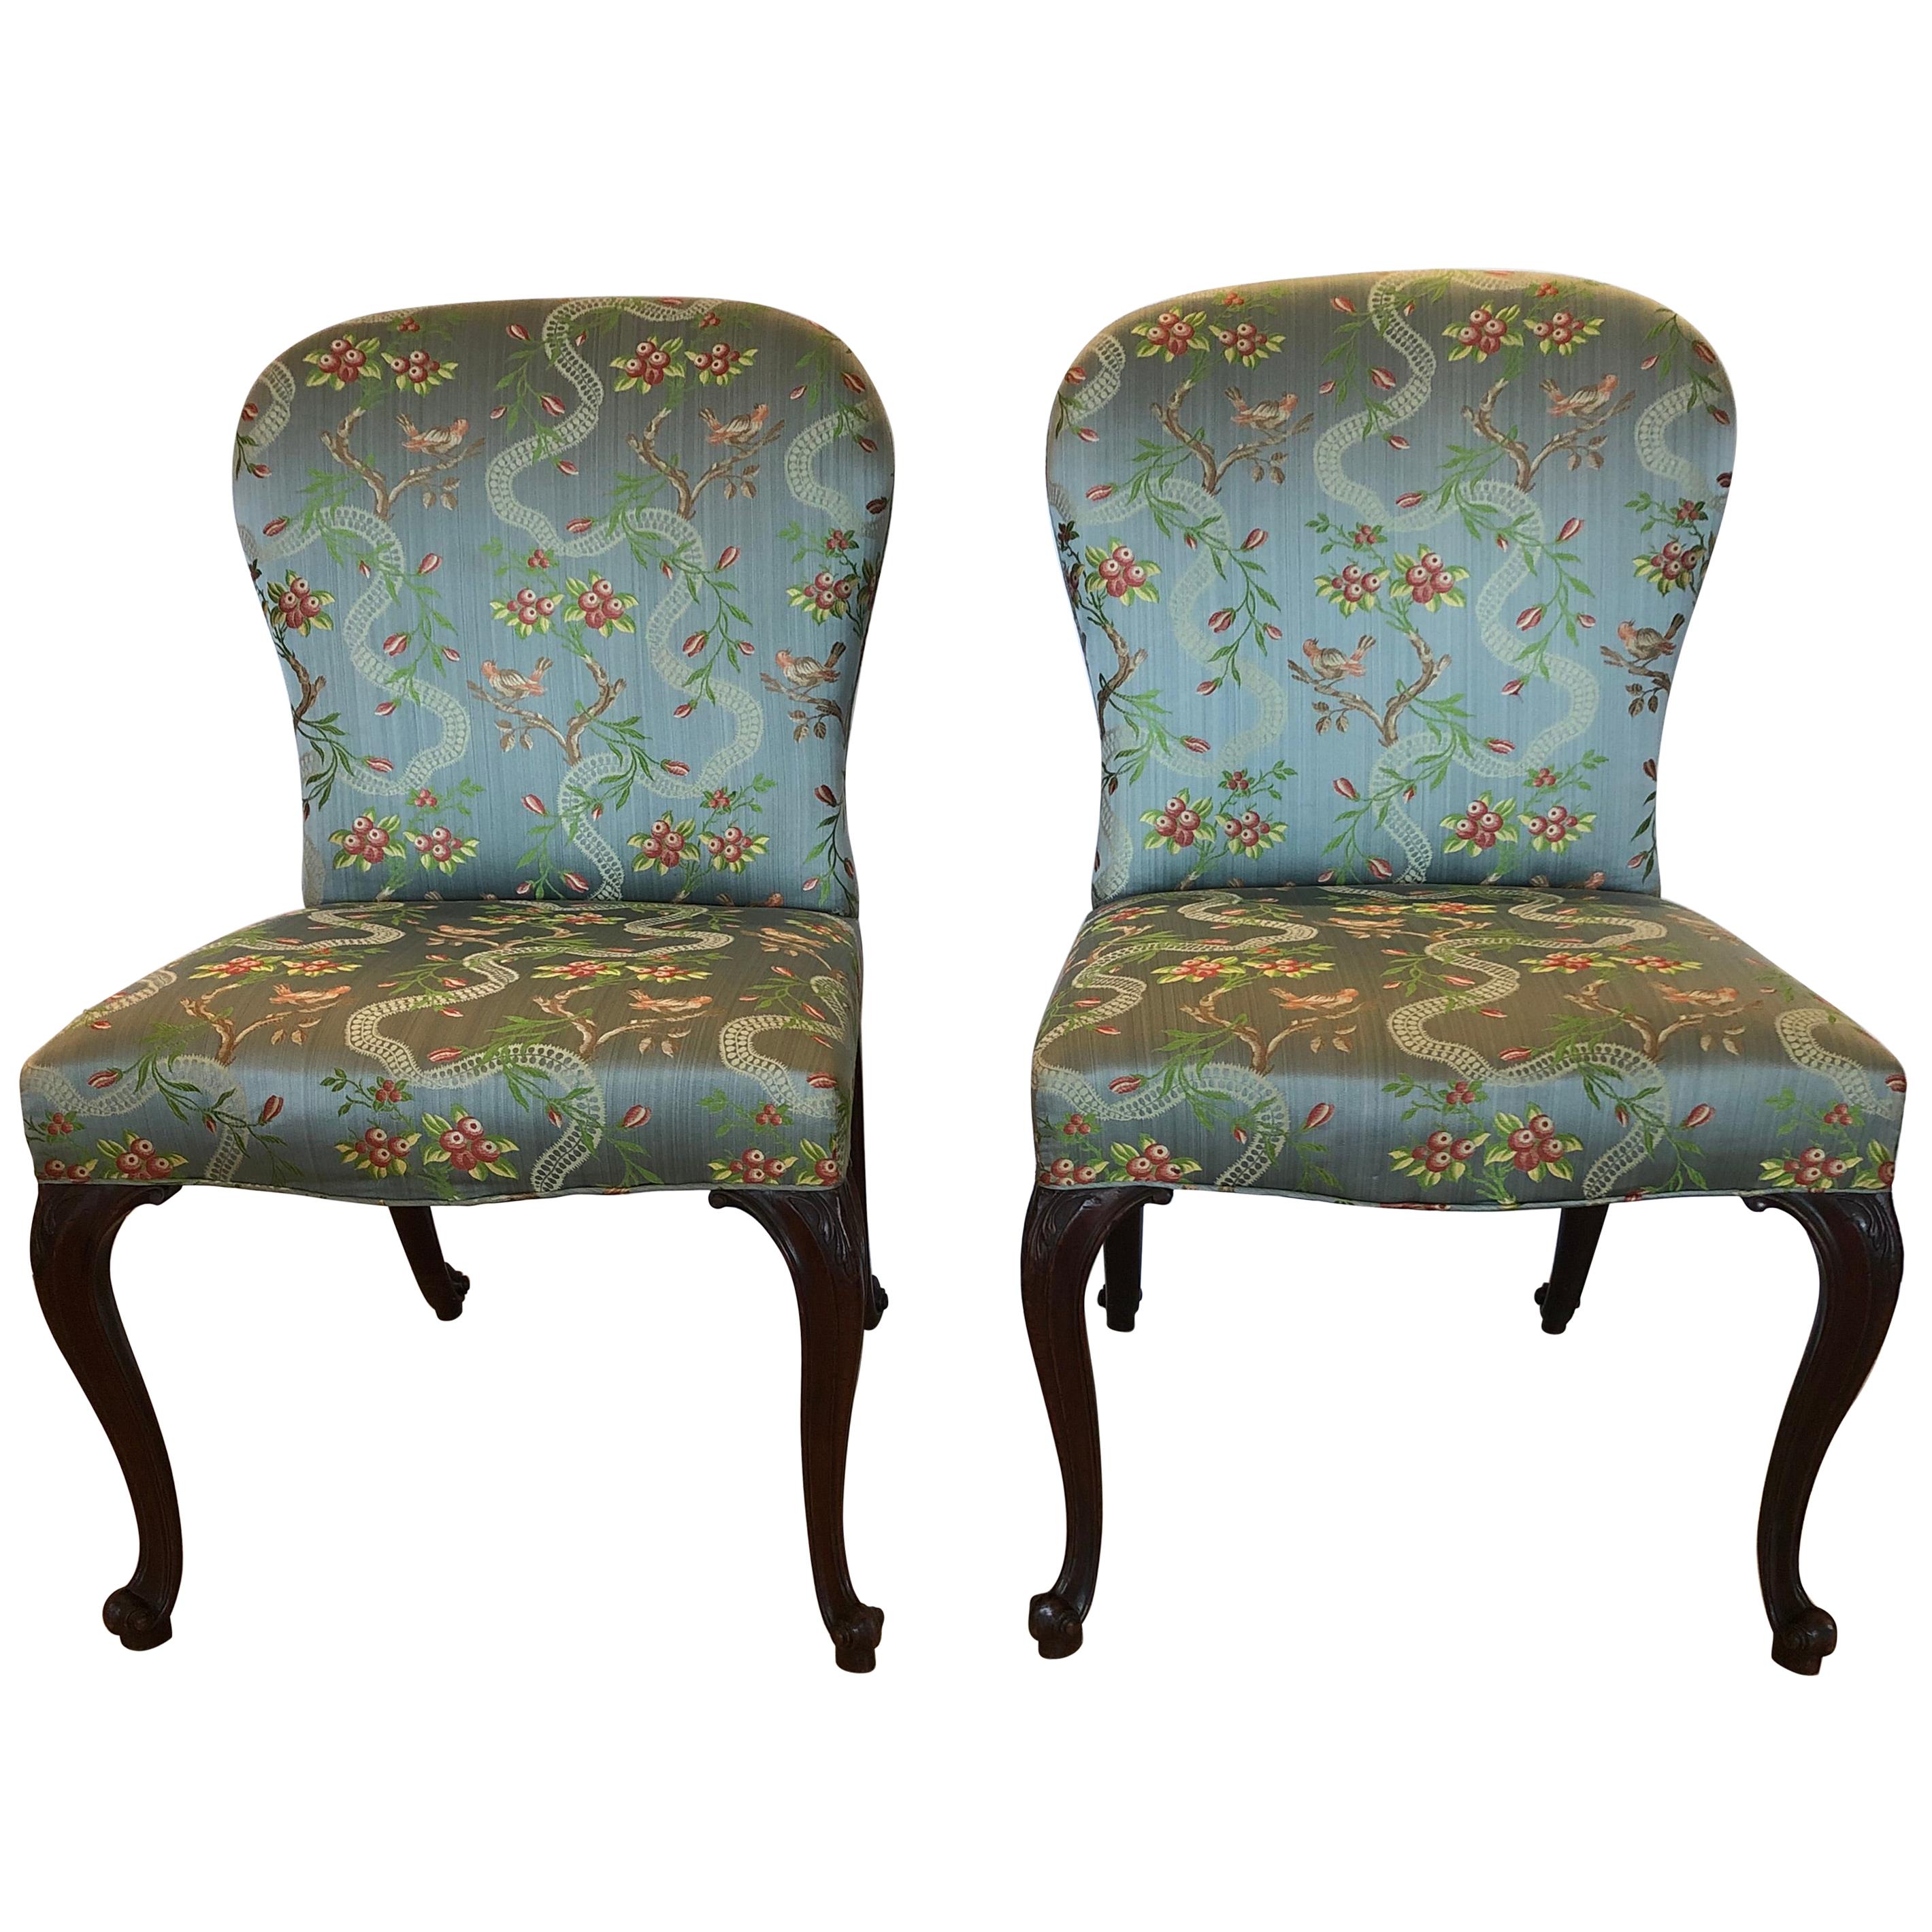 Very Fine 18th Century Georgian Side Chairs Dressed Up in Scalamandre Upholstery